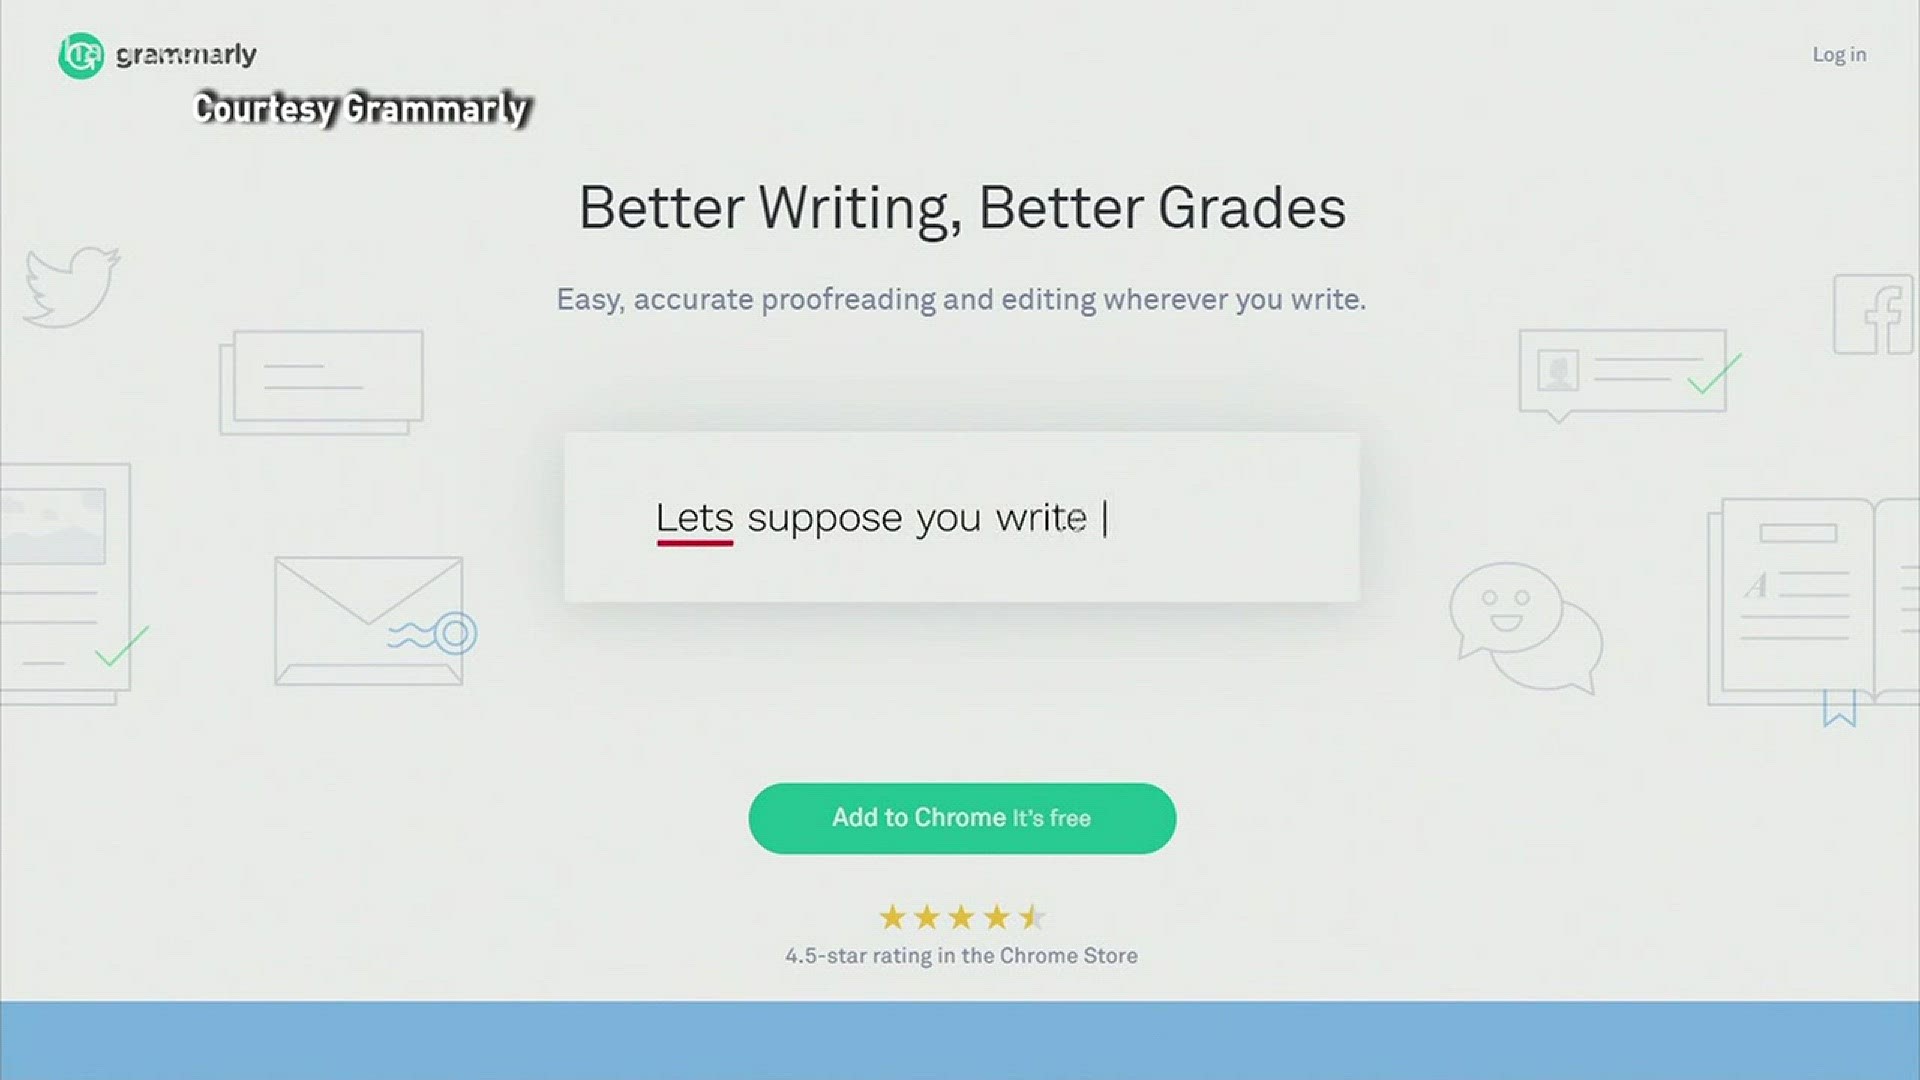 App of the Week: Grammarly